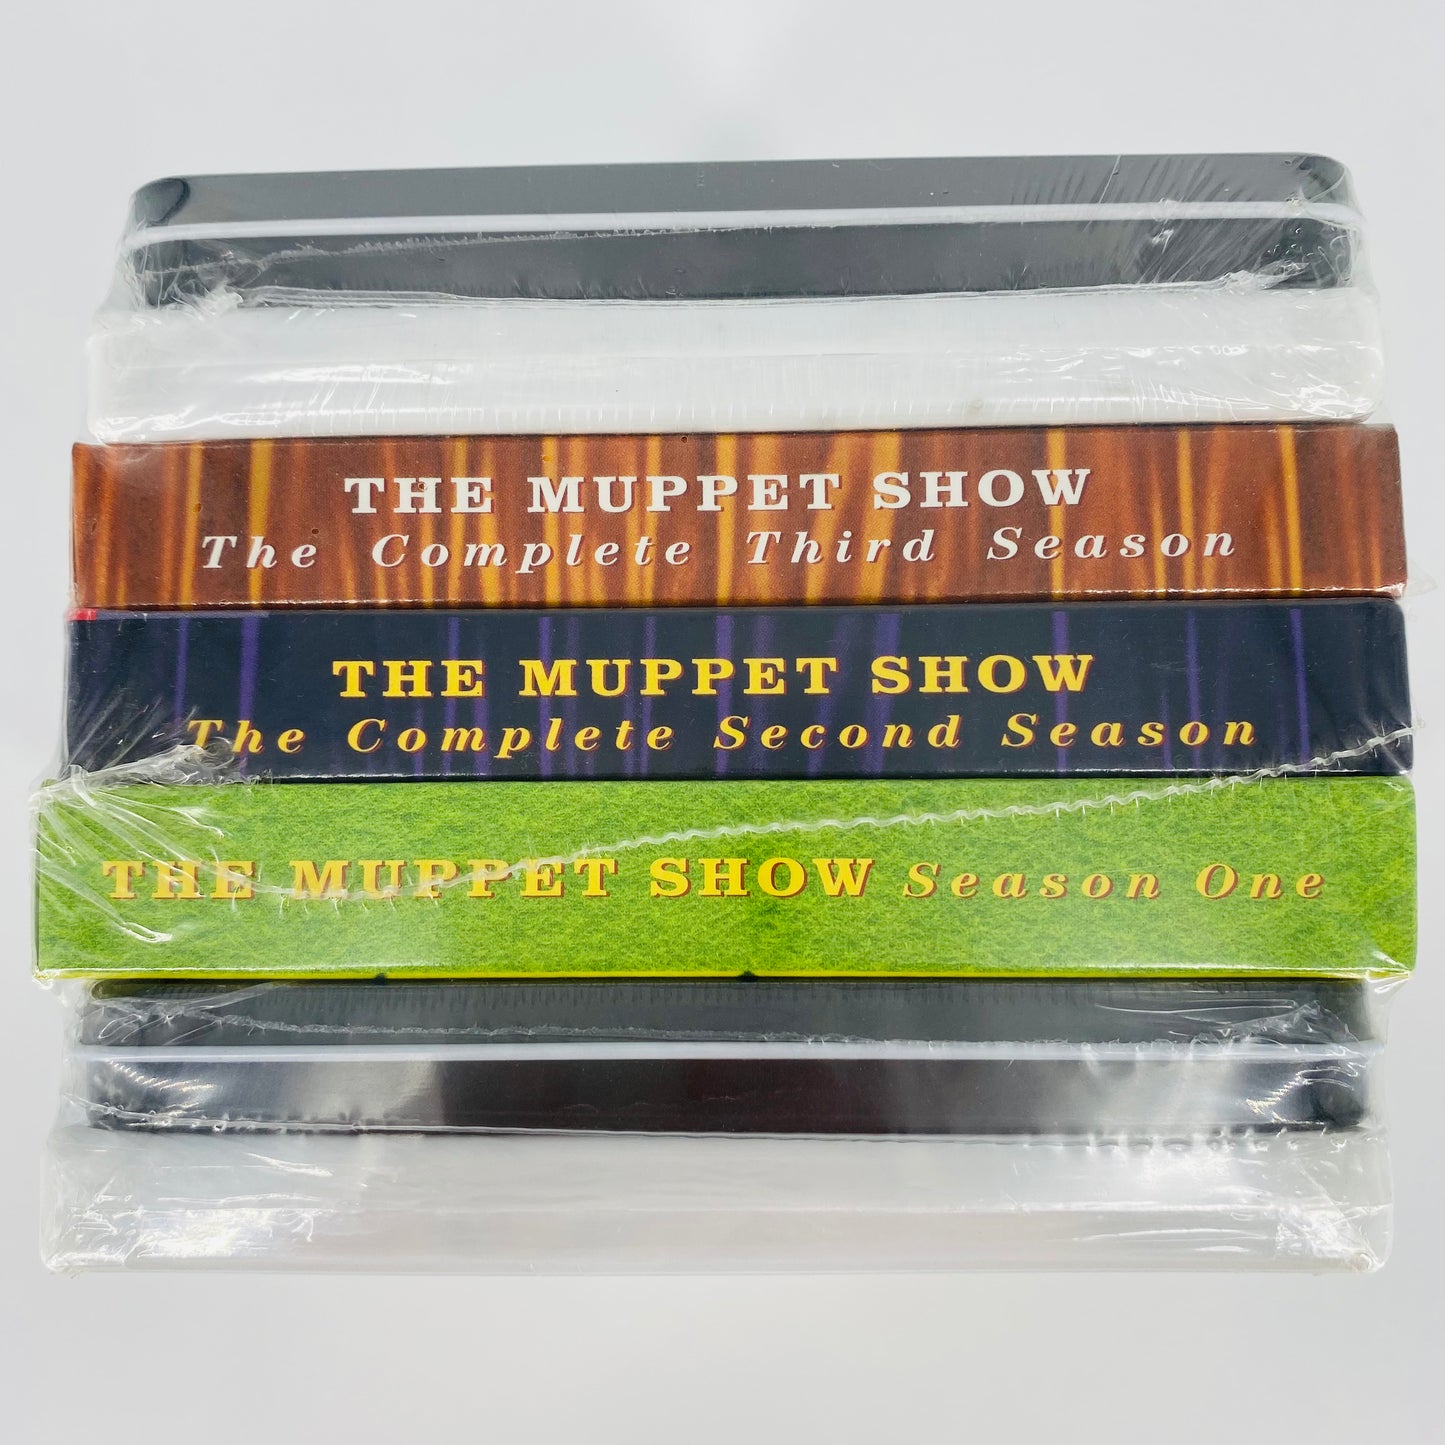 The Muppet Movie, Muppet Treasure Island & The Muppet Show Seasons 1-3 DVD's, 2 activity sets, 2 tin cases, 1 sticker sheet, 1 notepad, 2 pencils, and 1 pencil sharpener